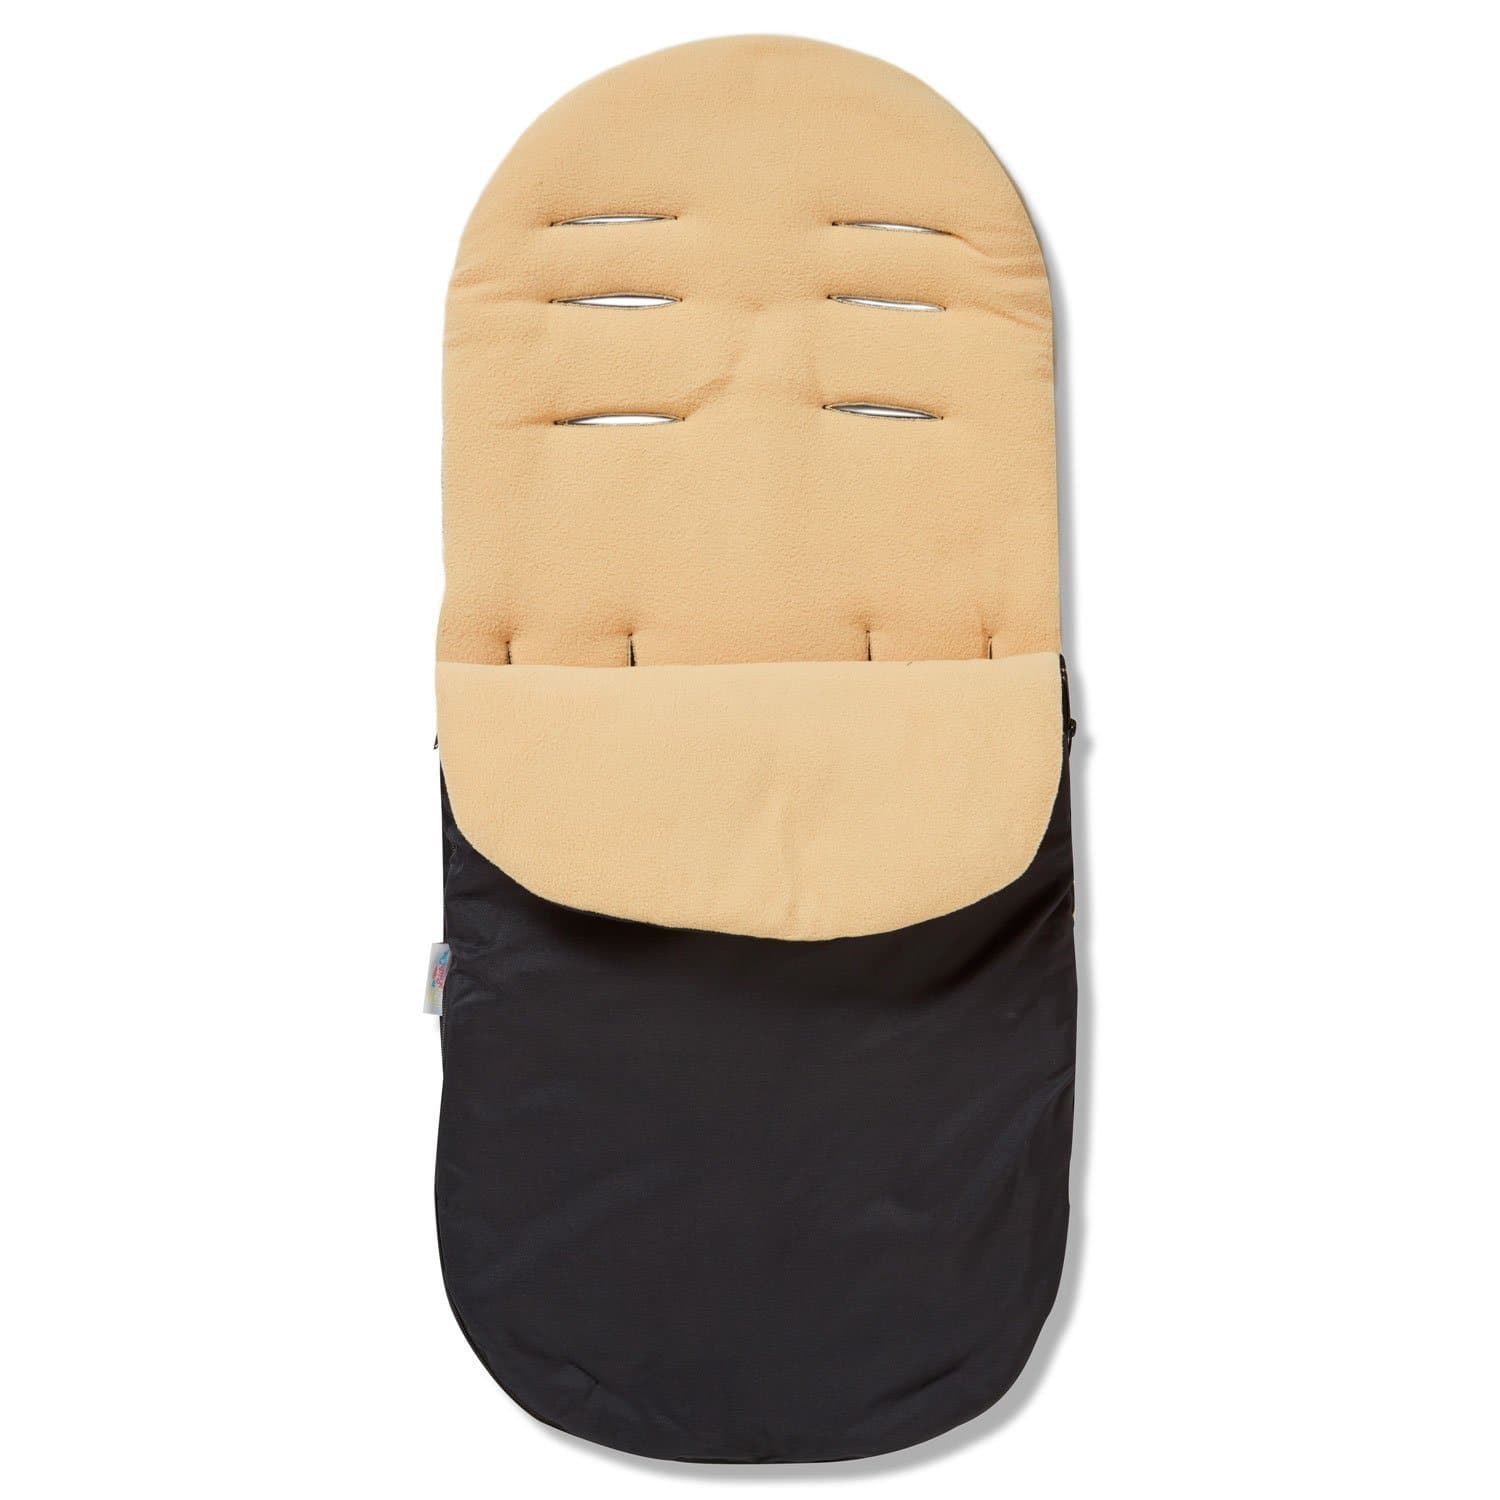 Footmuff / Cosy Toes Compatible with Brio - For Your Little One